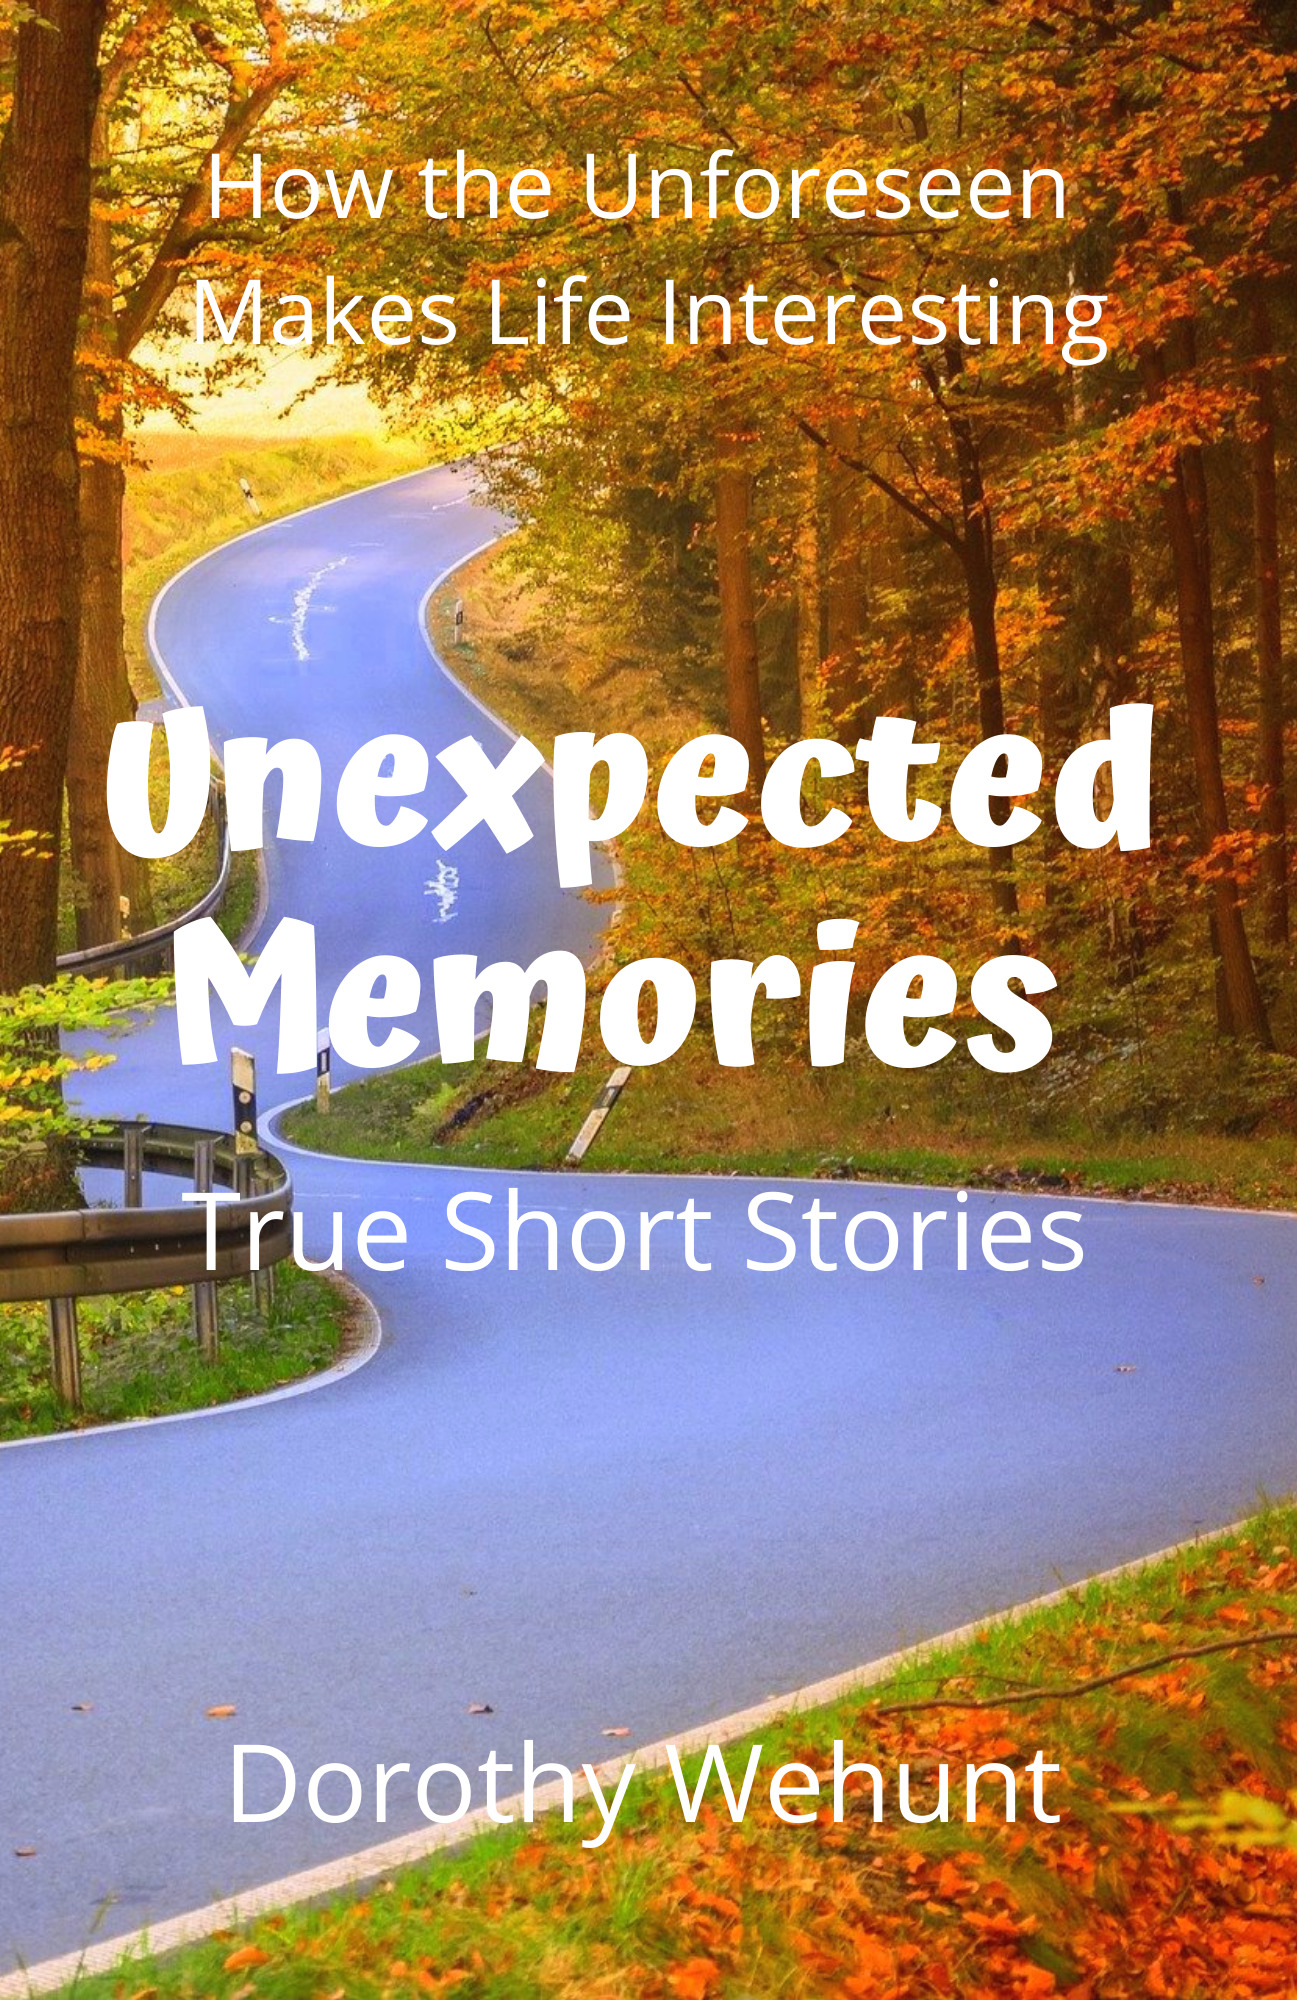 FREE: Unexpected Memories by Dorothy Wehunt